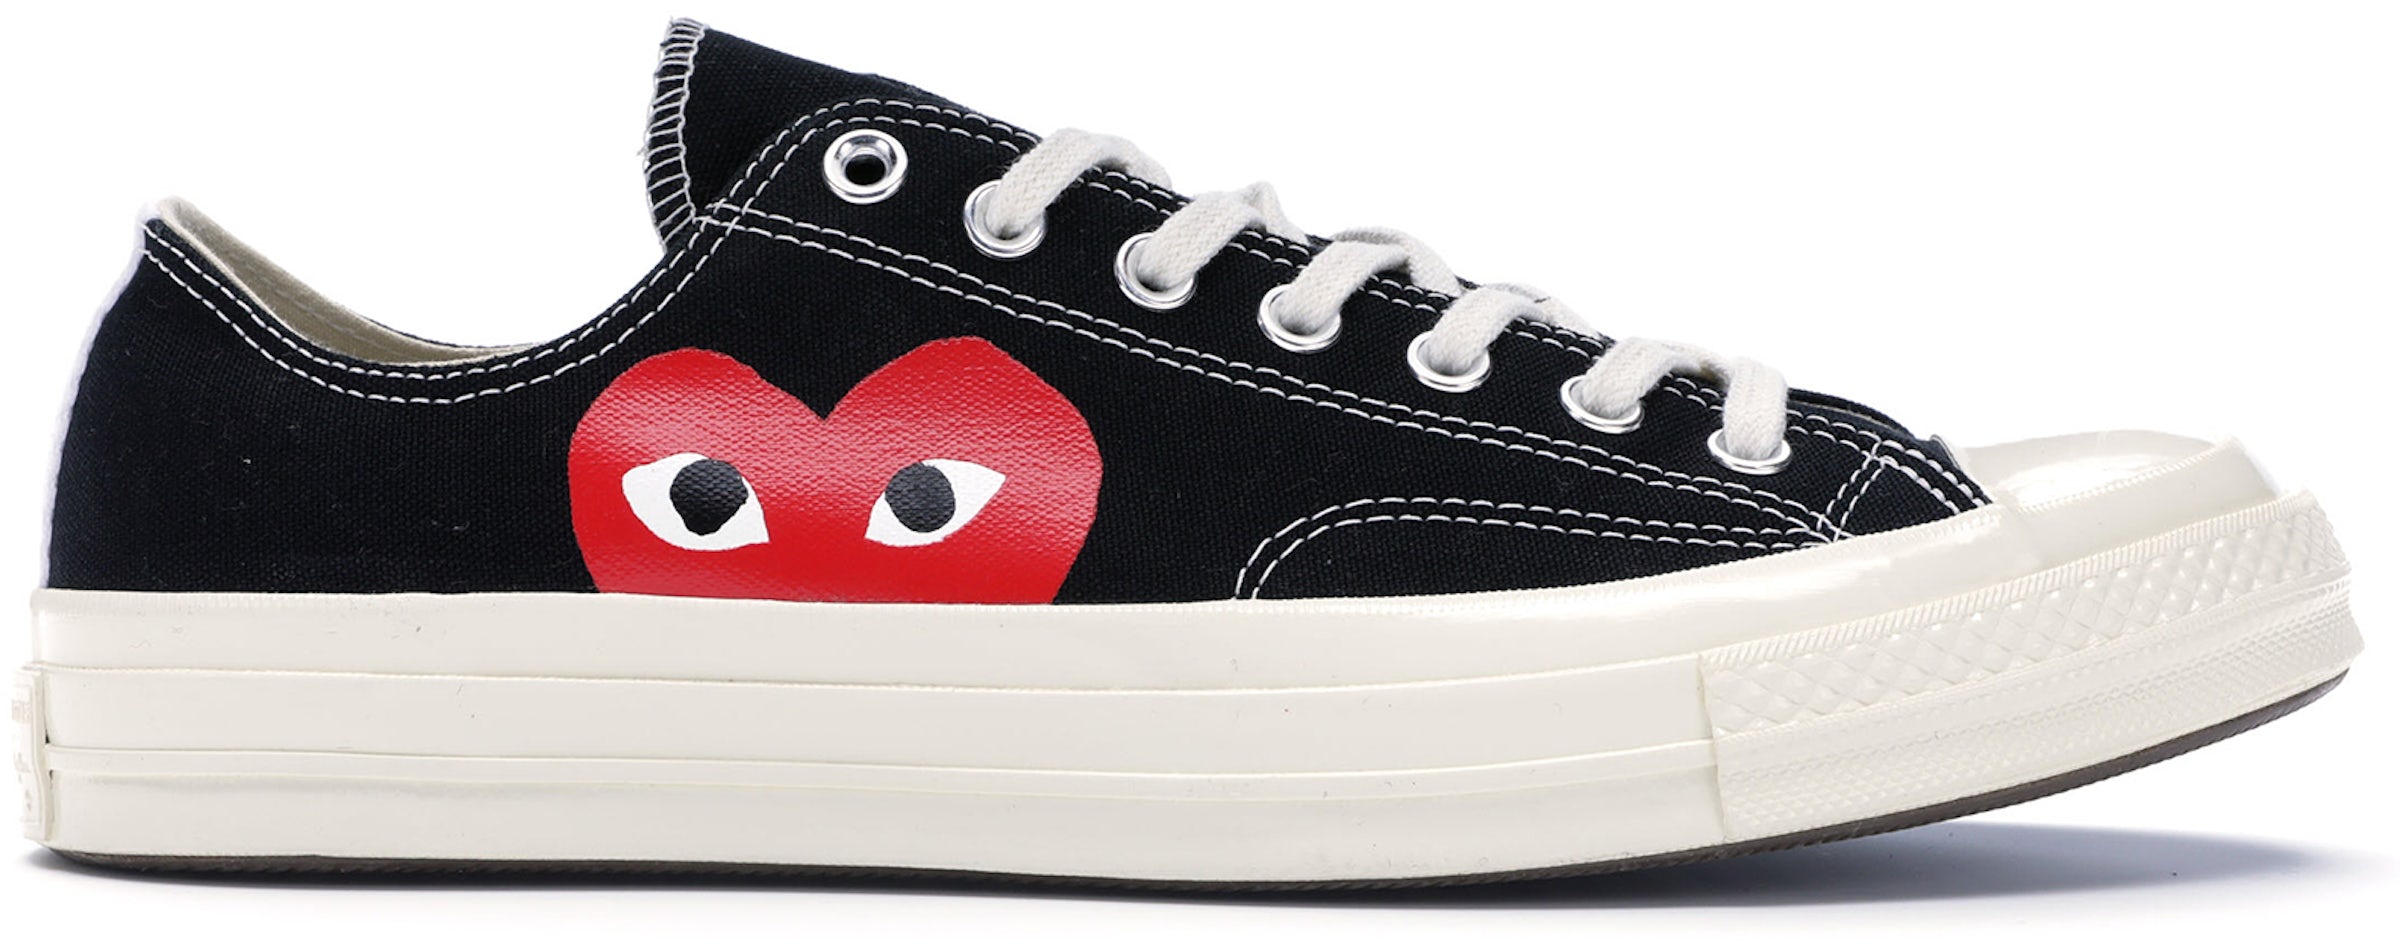 Mentor Teasing angivet Buy Converse Comme Des Garçons Shoes & New Sneakers - StockX